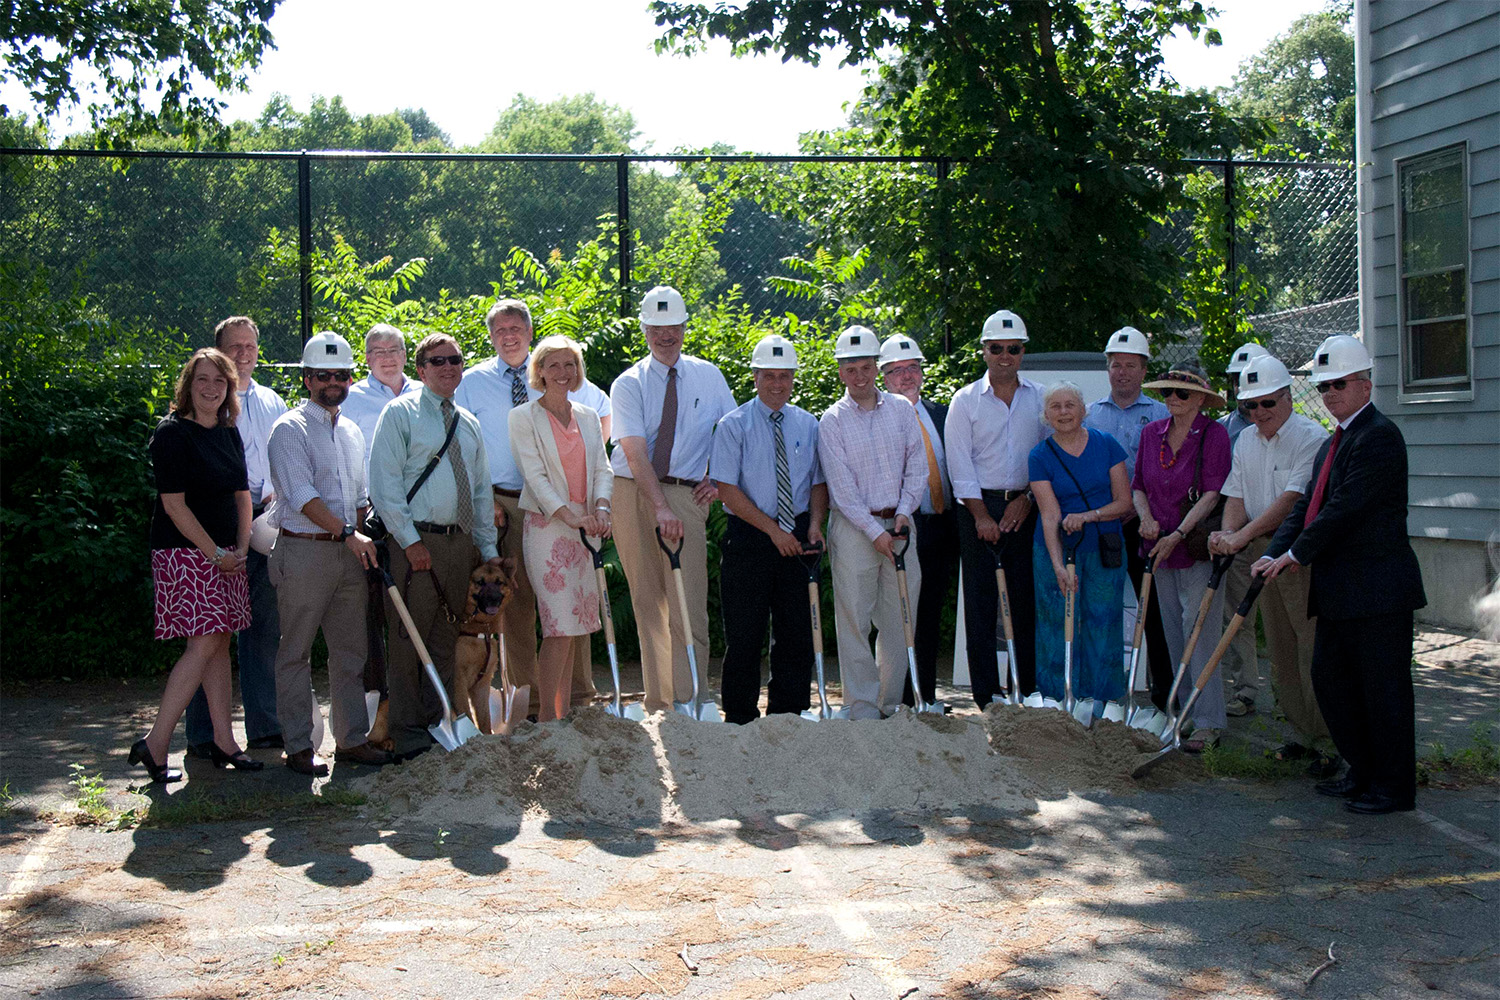 All groundbreaking ceremony participants holding shovels in the dirt pile 